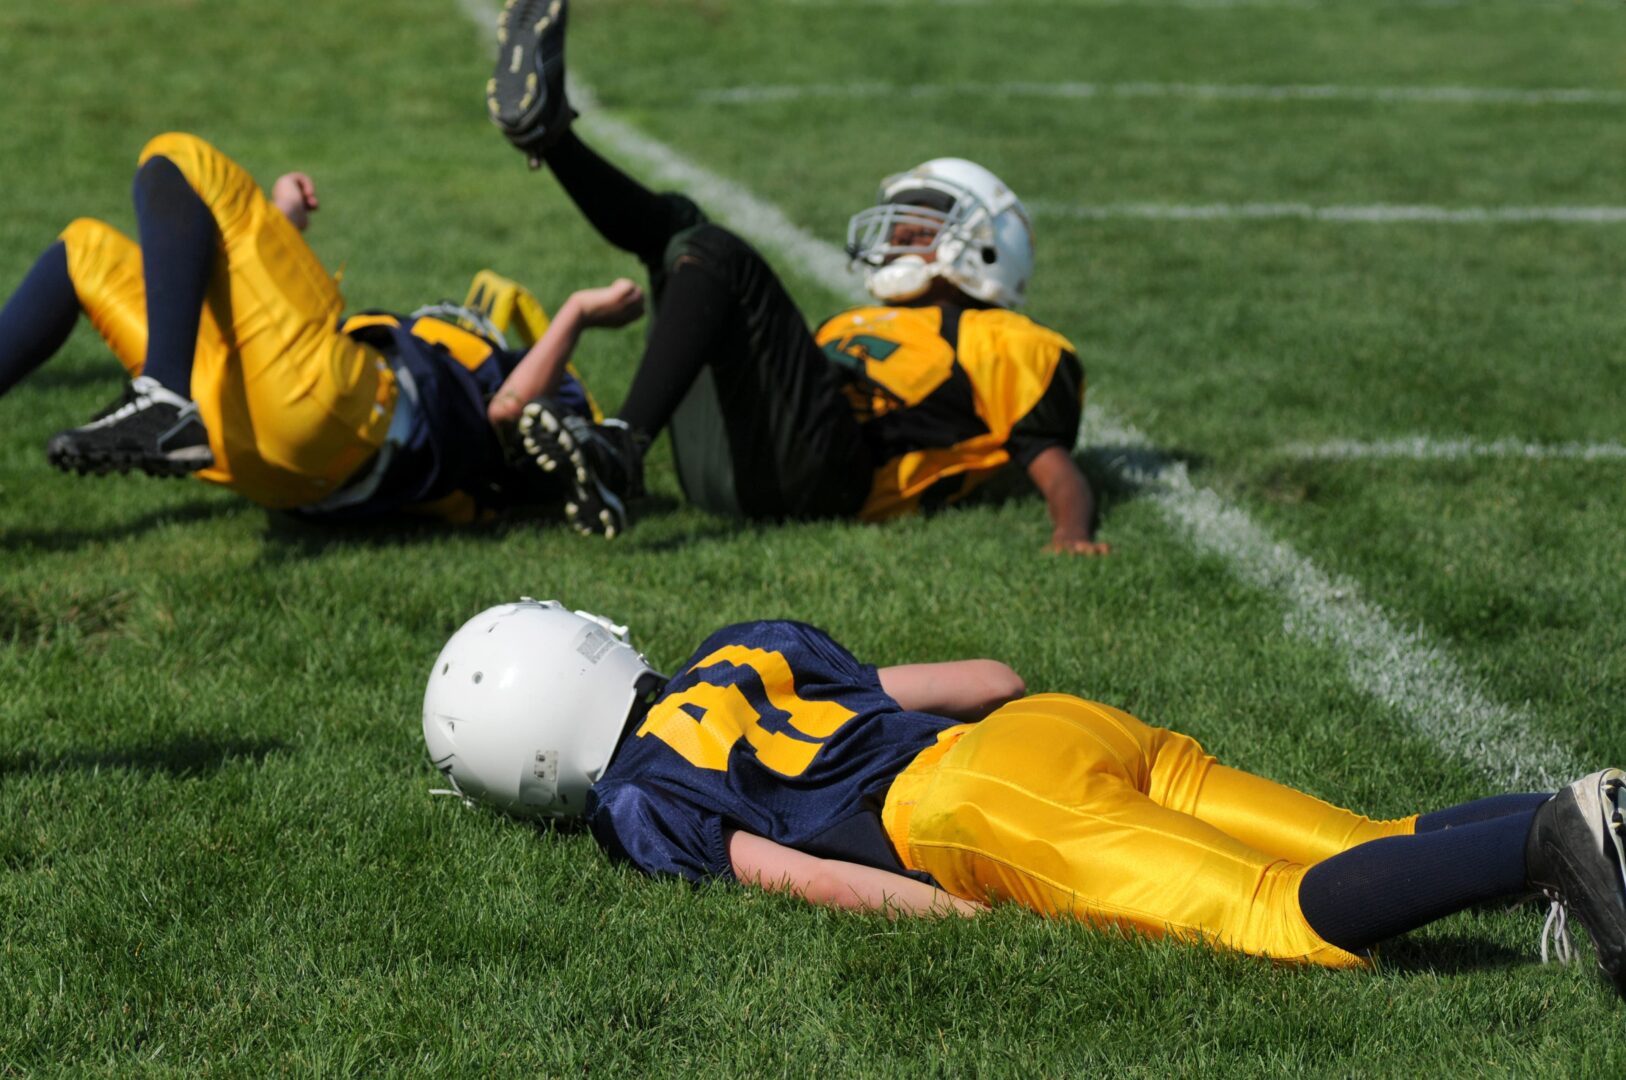 high-school-football-player-with-concussion